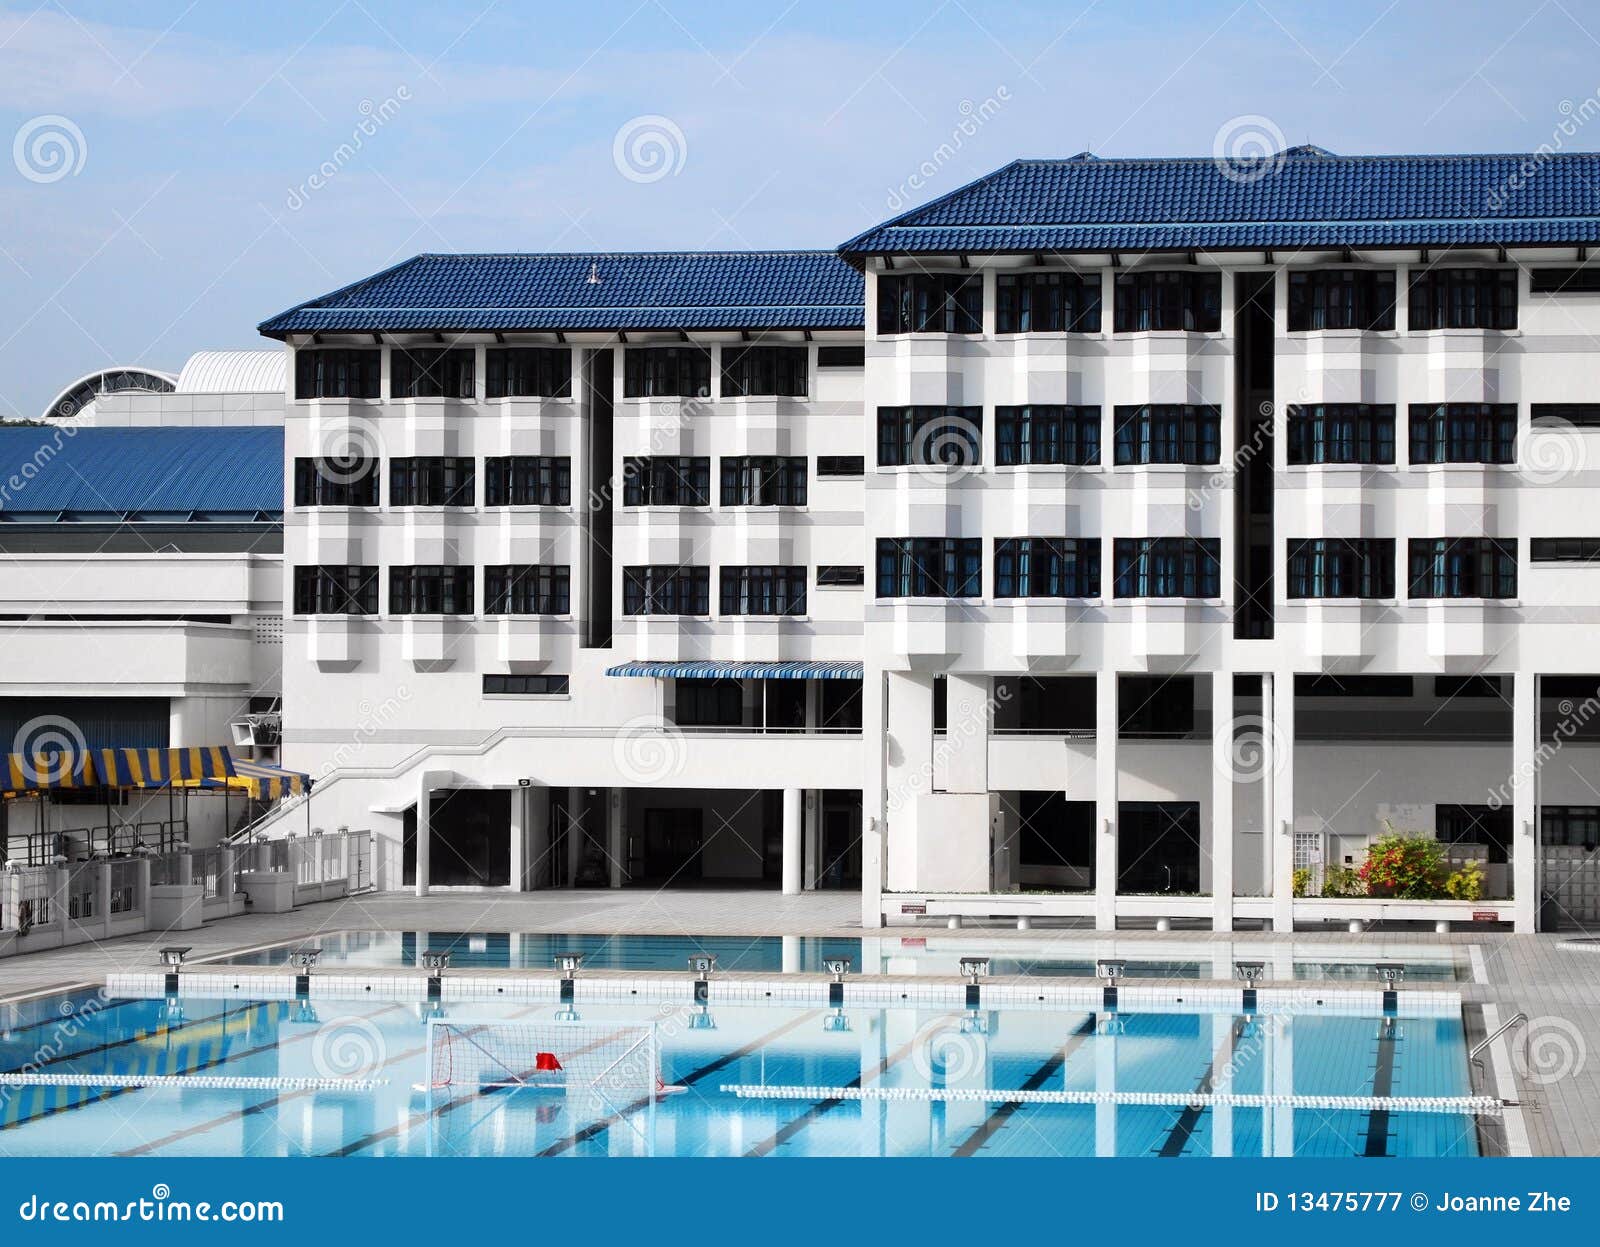 School Boarding House With Swimming Pool Royalty Free ...